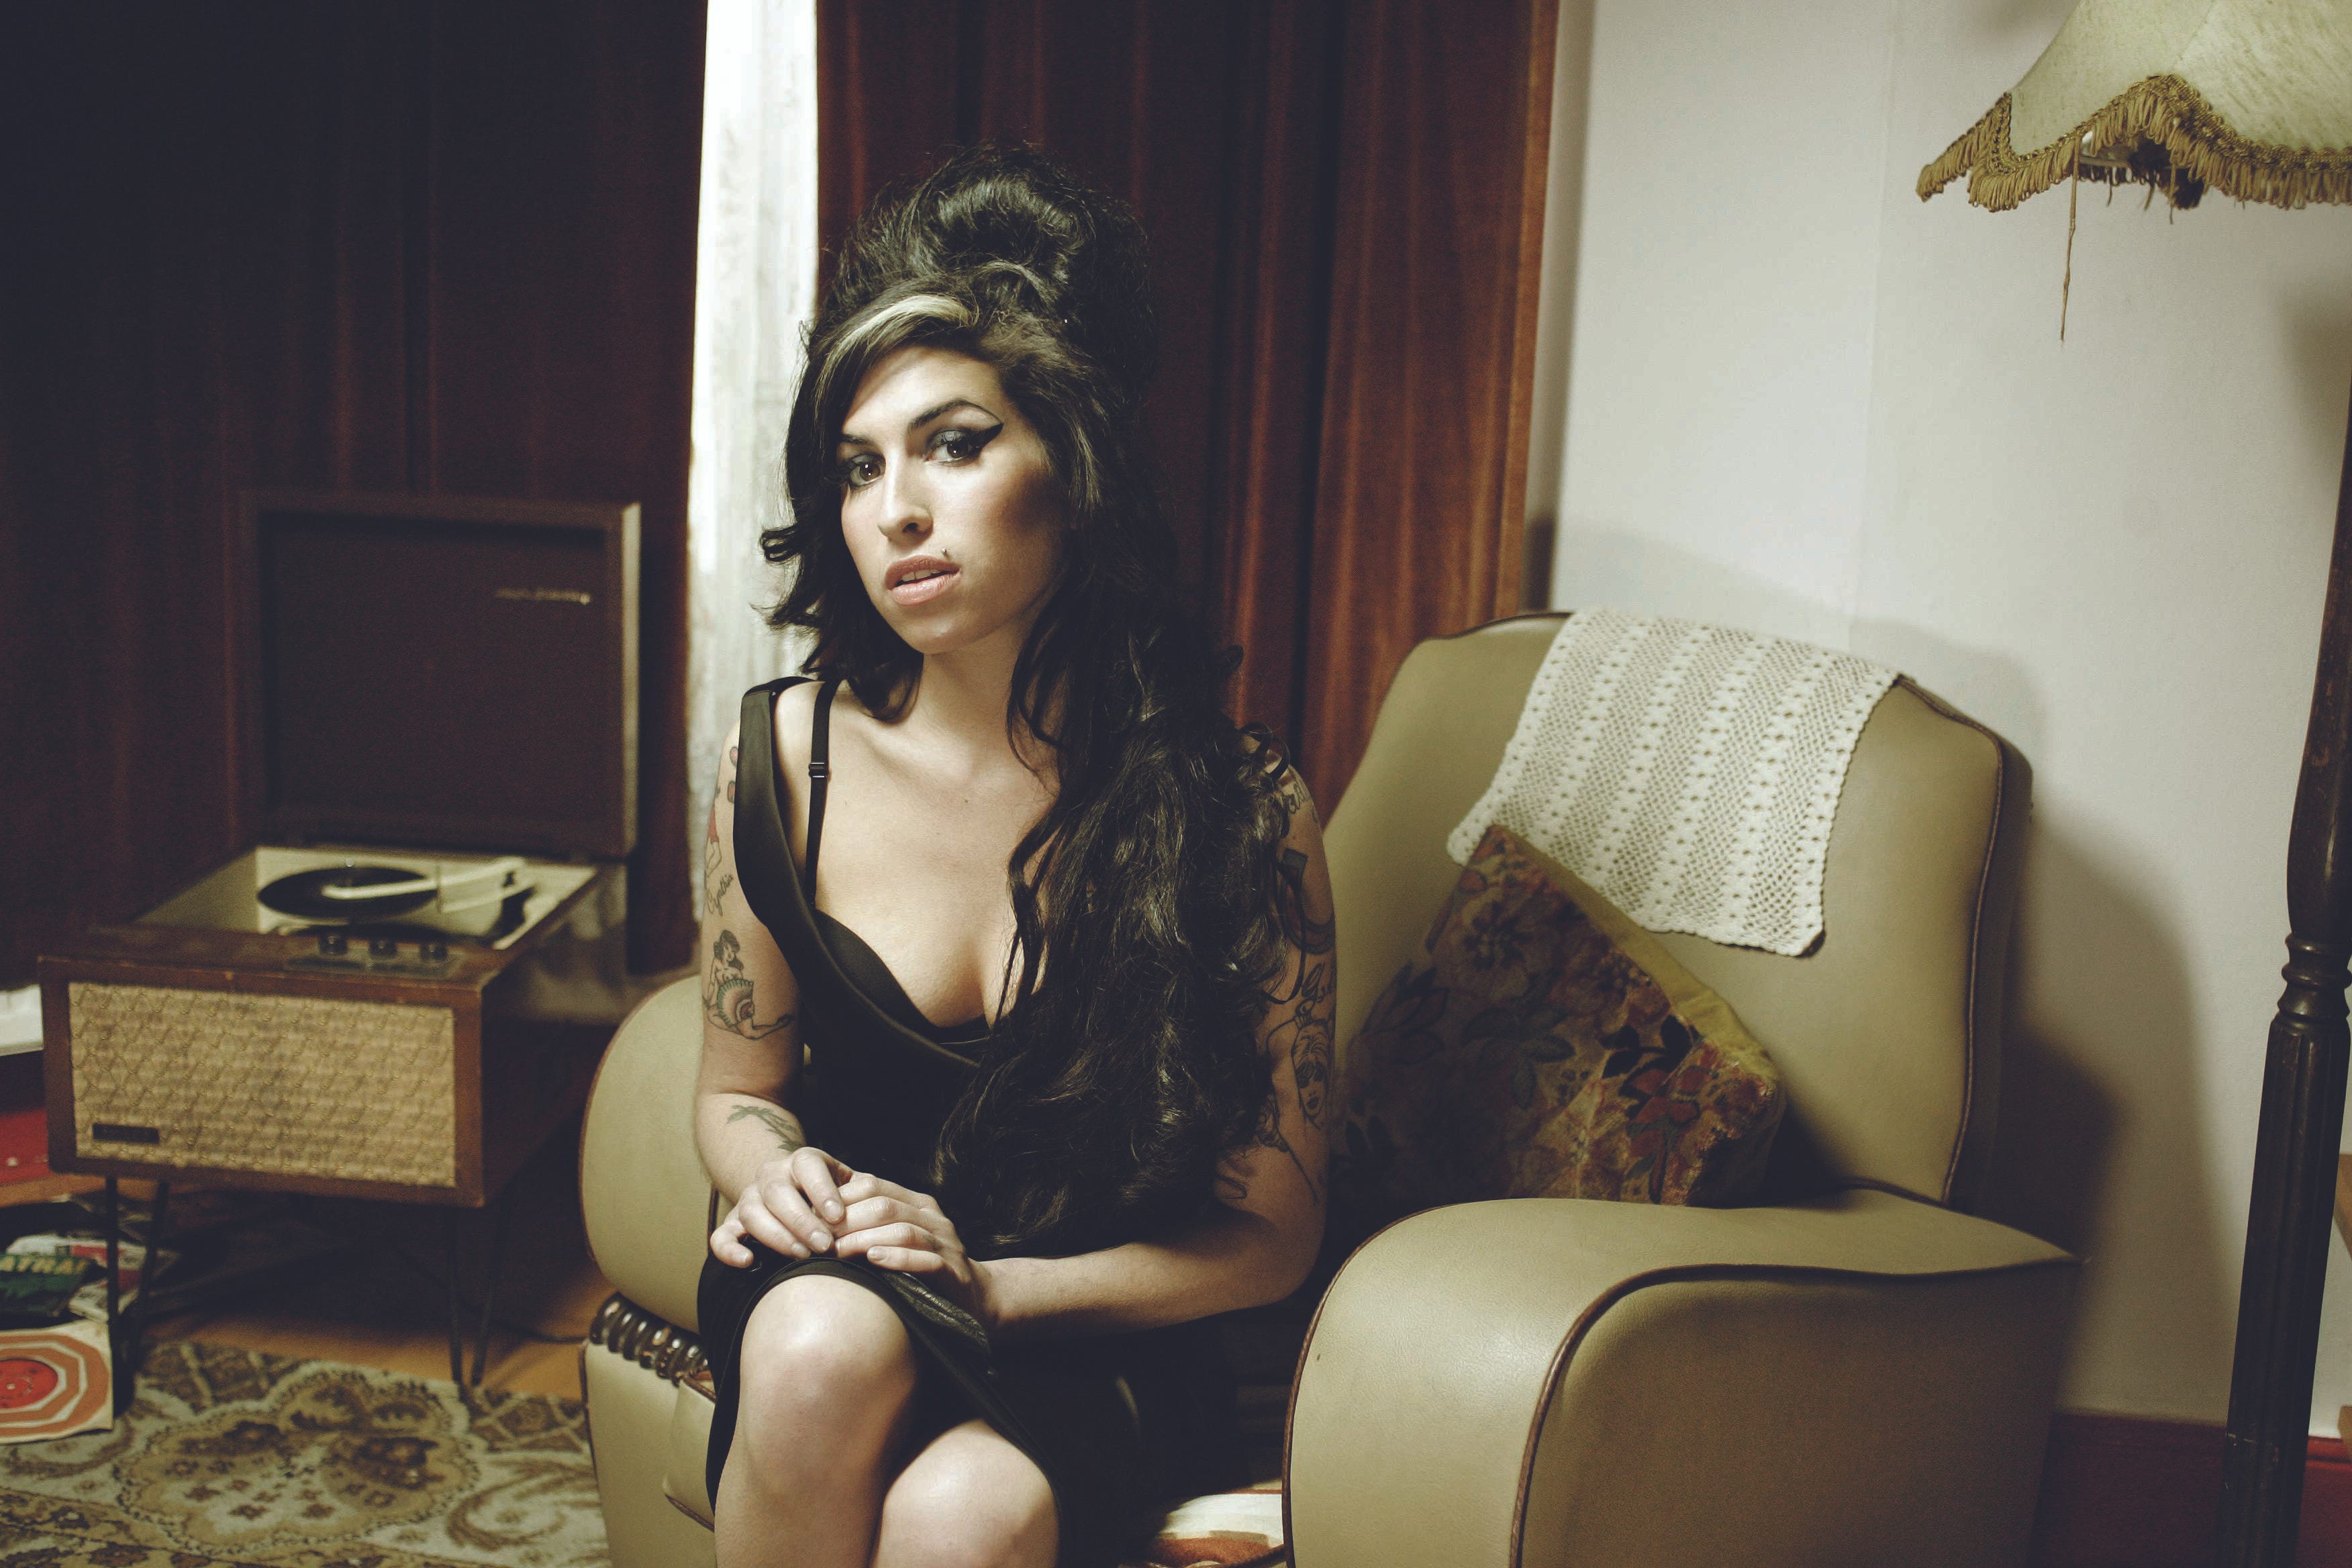 10 Poignant Amy Winehouse Quotes Paul Sexton By Udiscover Music Udiscover Music Medium